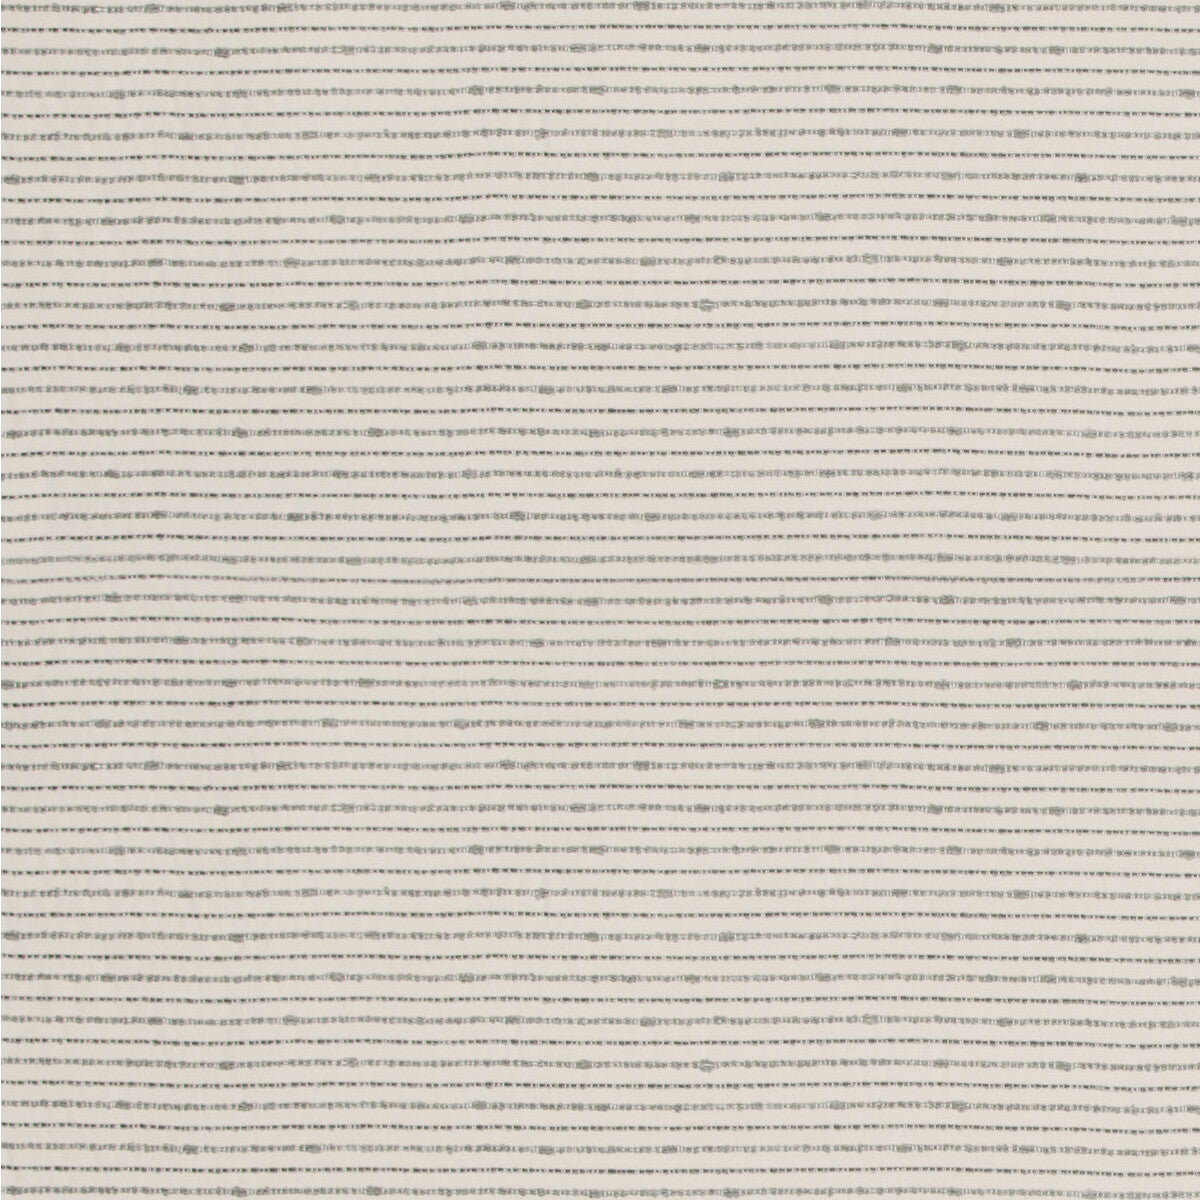 Seeth fabric in smoke color - pattern GWF-3736.111.0 - by Lee Jofa Modern in the Kw Terra Firma II Indoor Outdoor collection